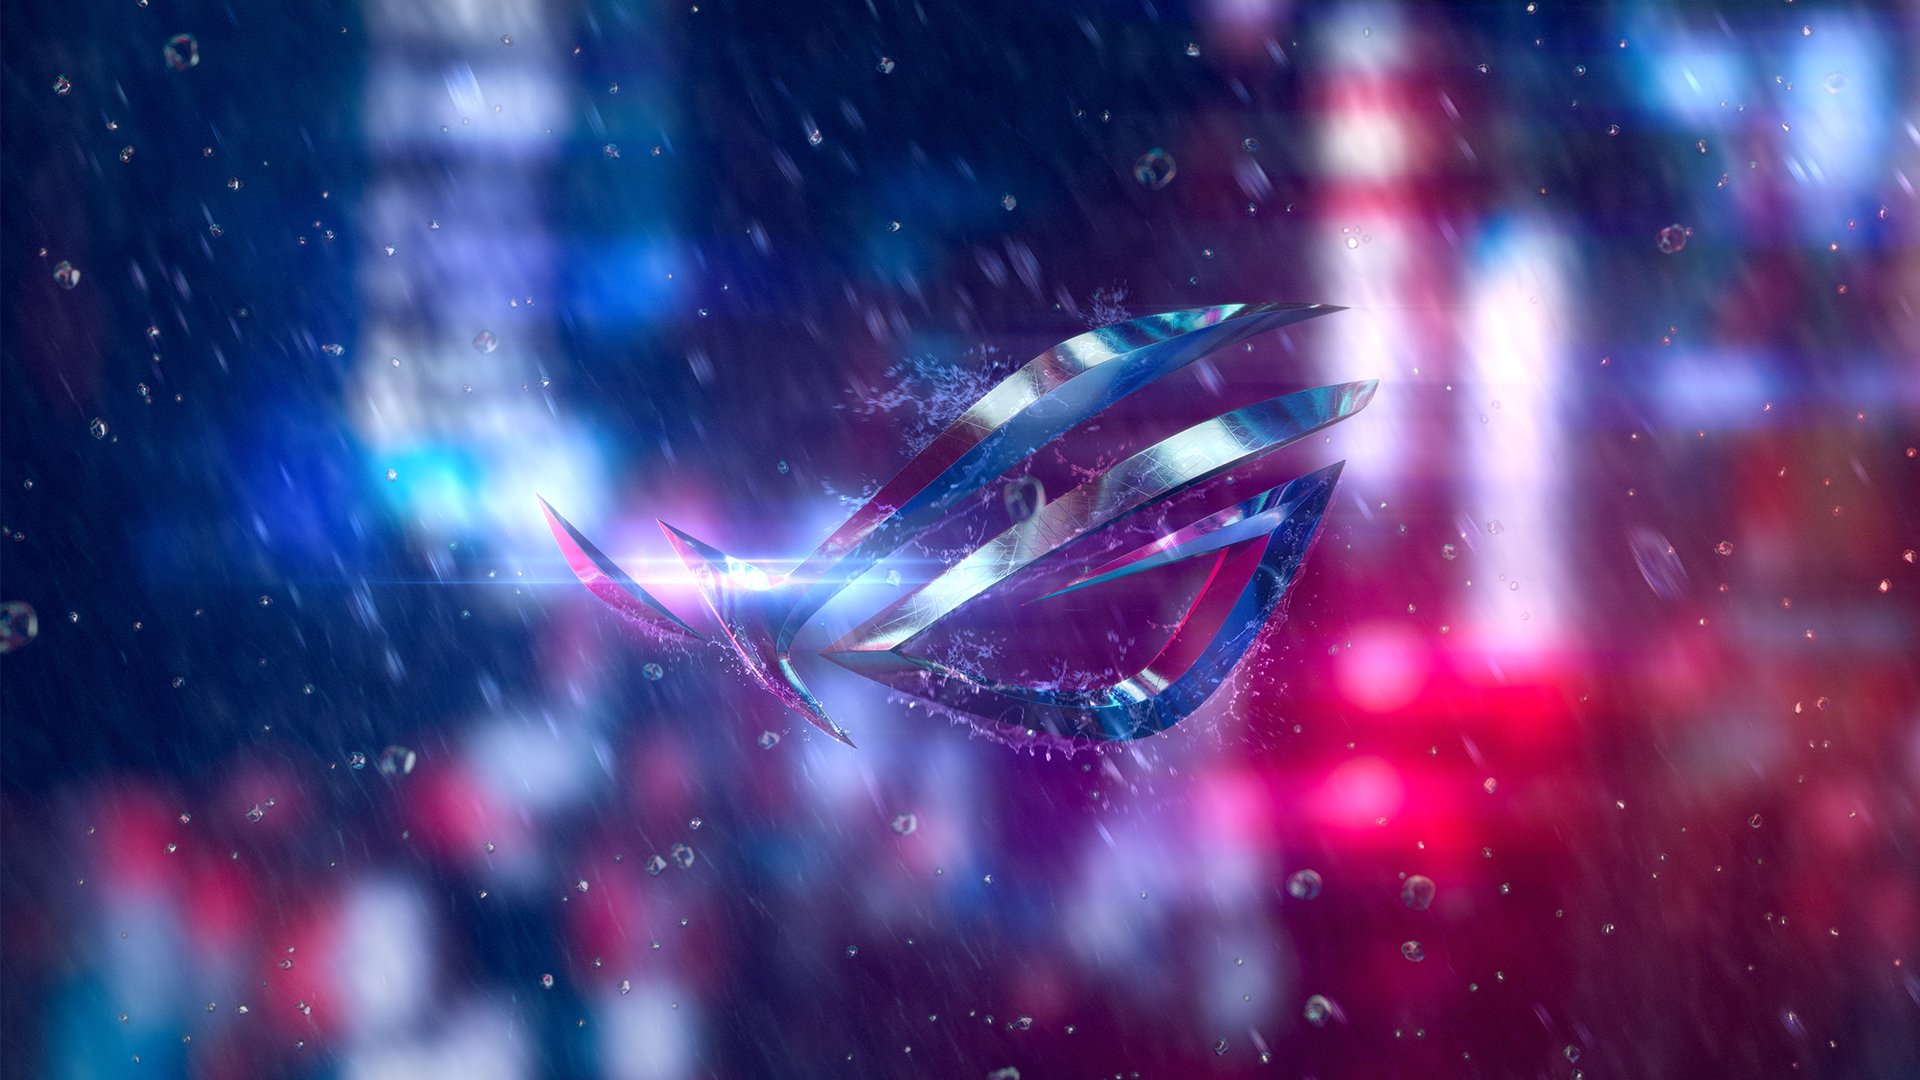 Rog Global On Twitter Check Out The Rainy Night Wallpaper Get